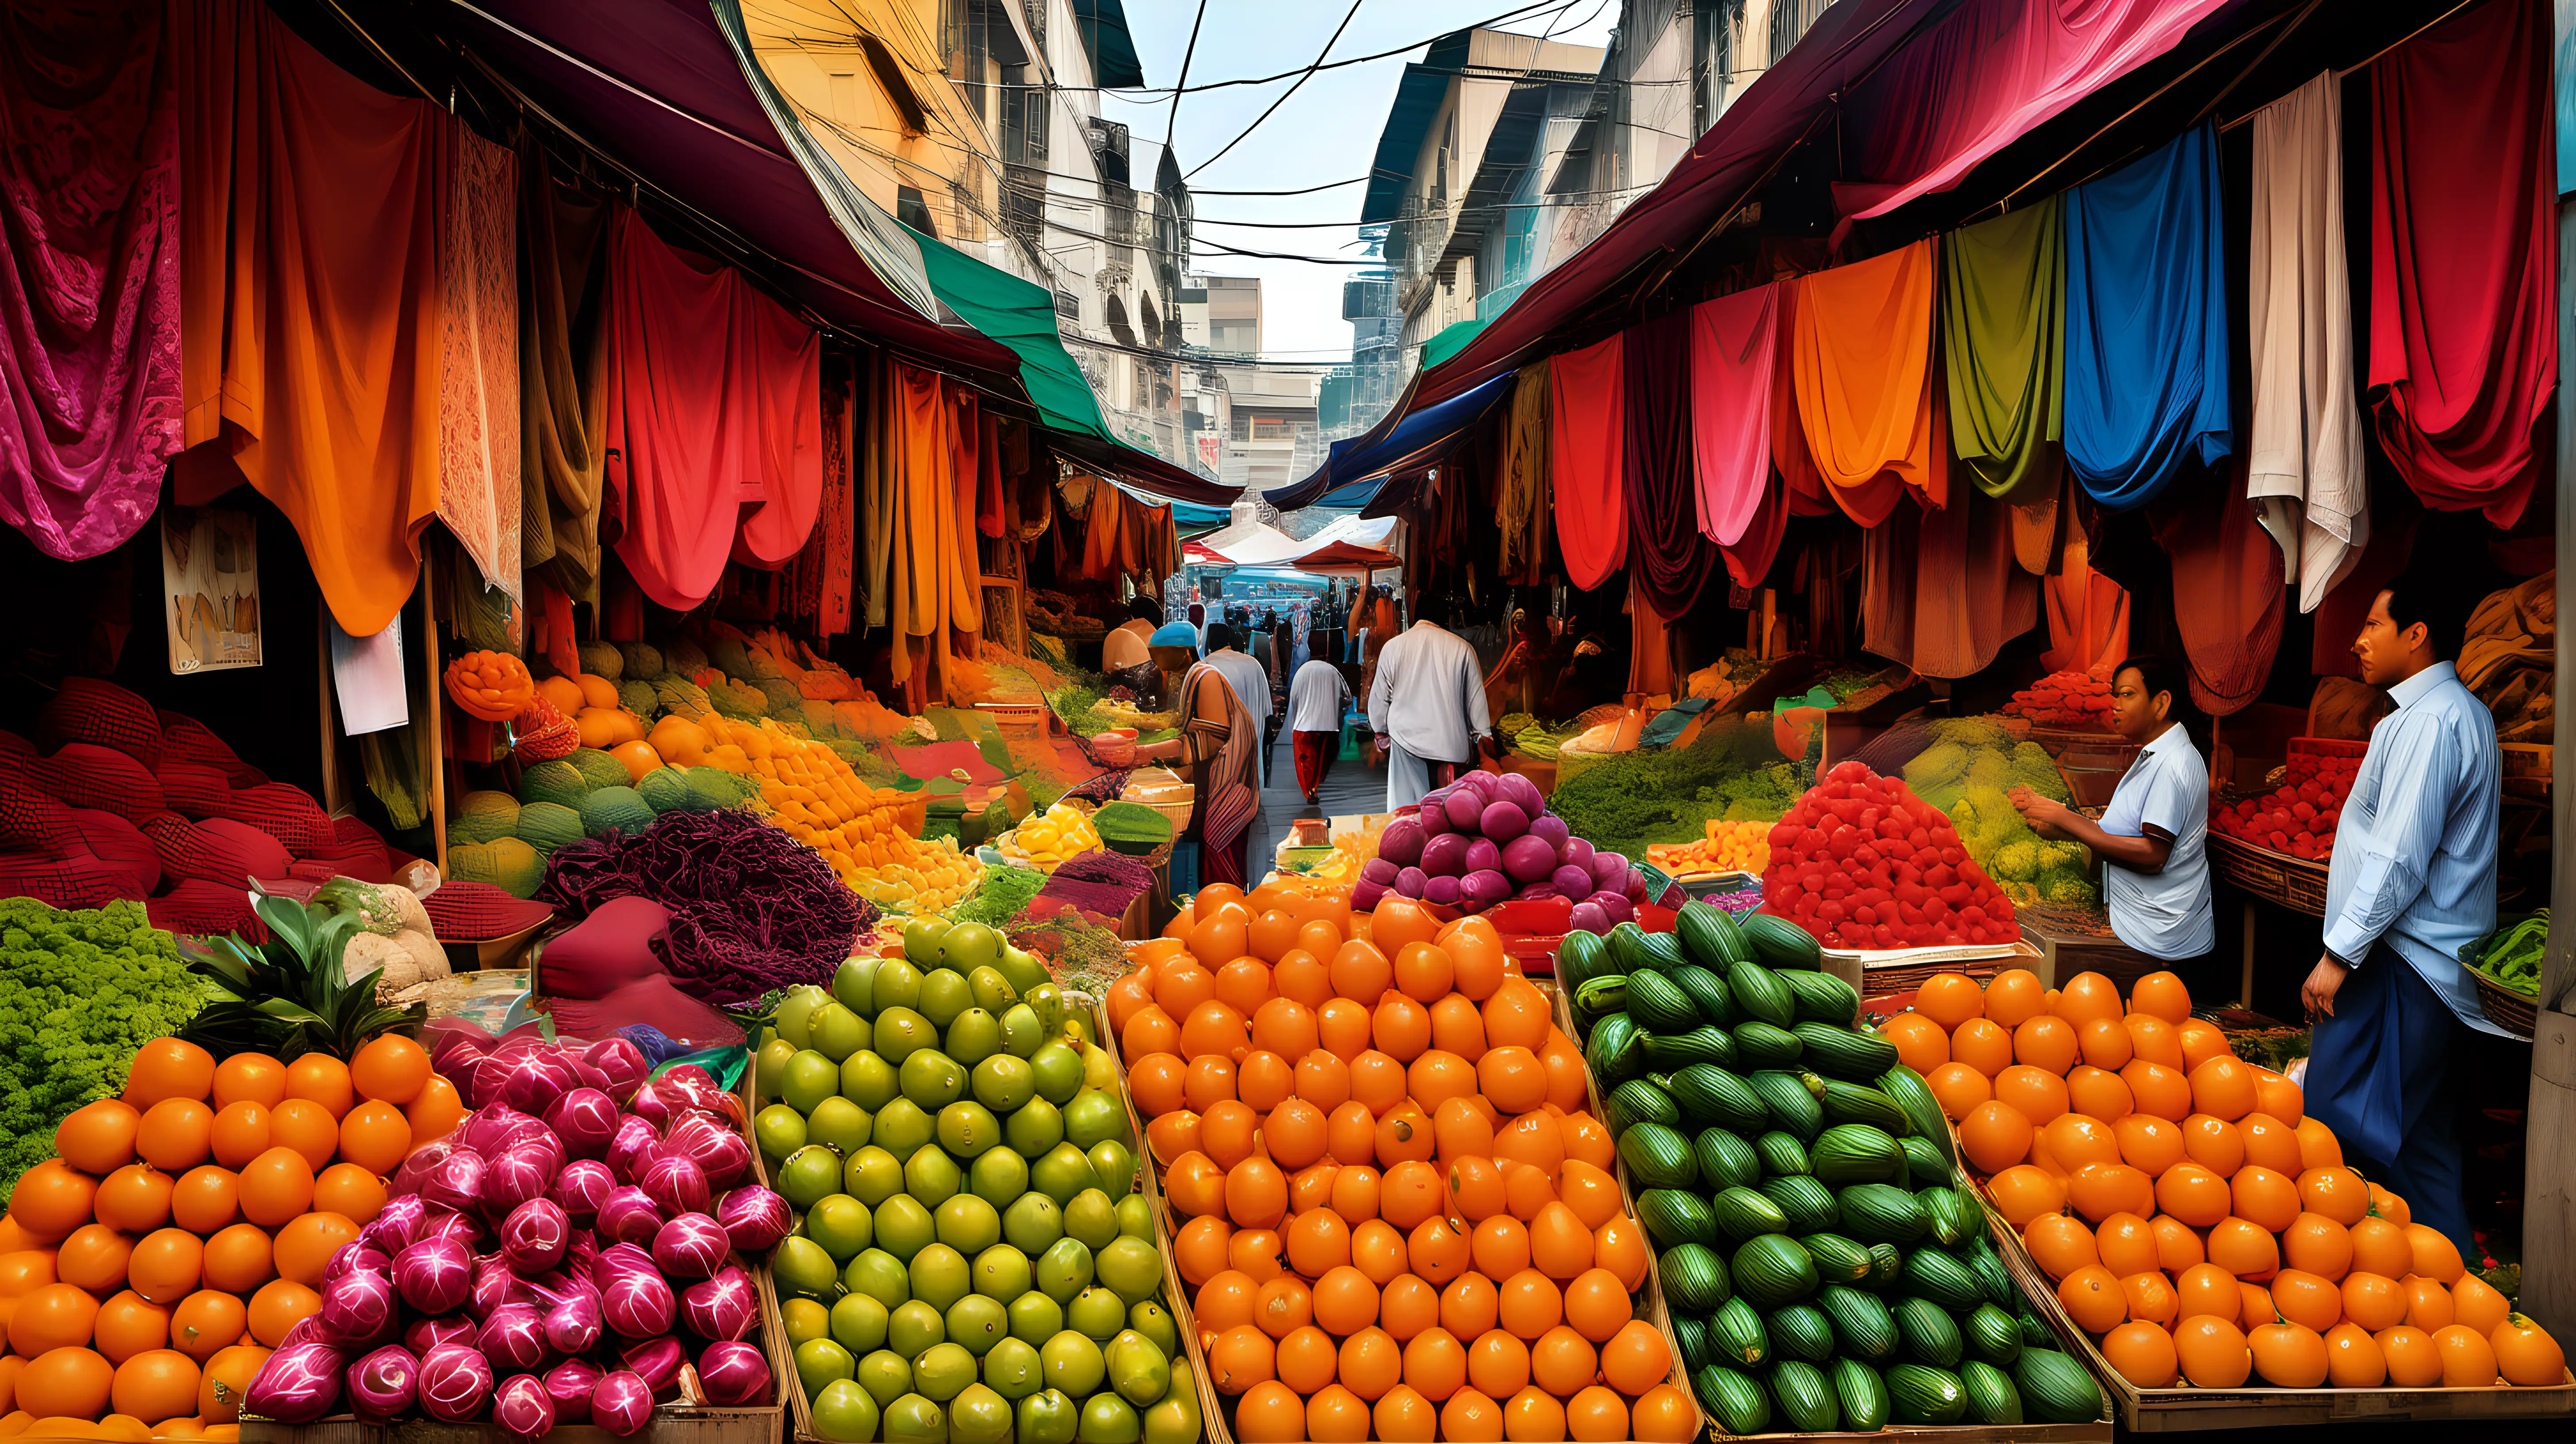 Vibrant Market Scene Overflowing with Fresh Produce and Textiles